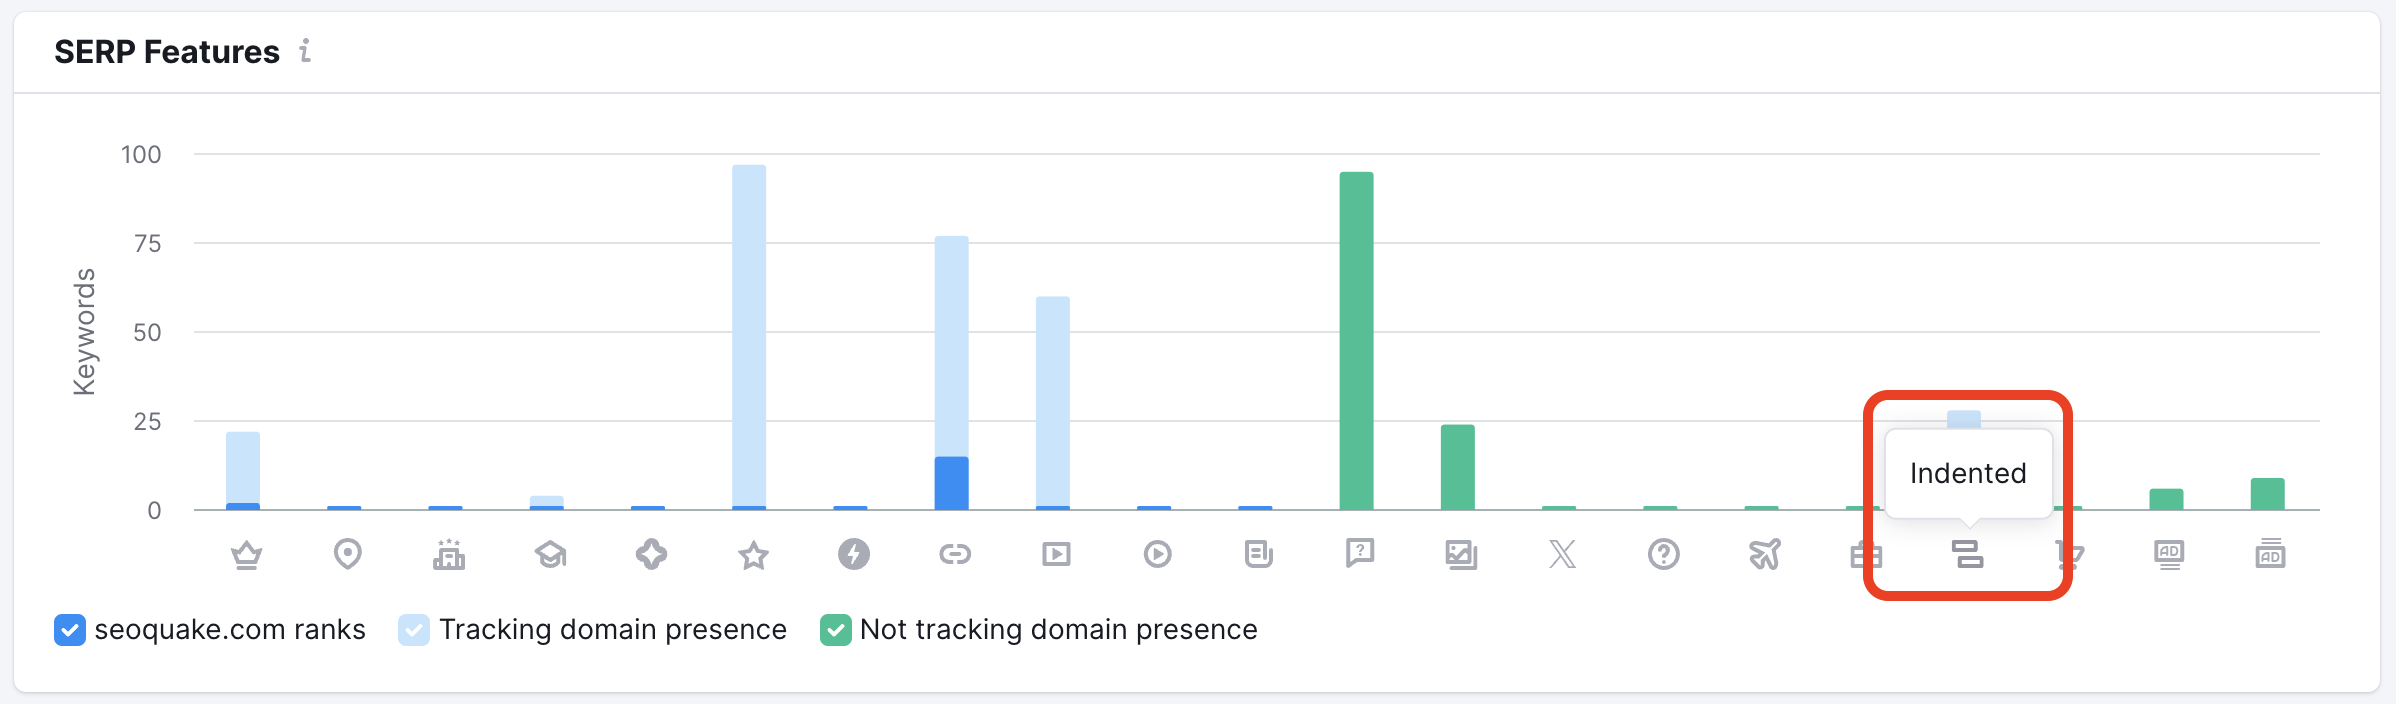 Position Tracking - Landscape report SERP Features performance